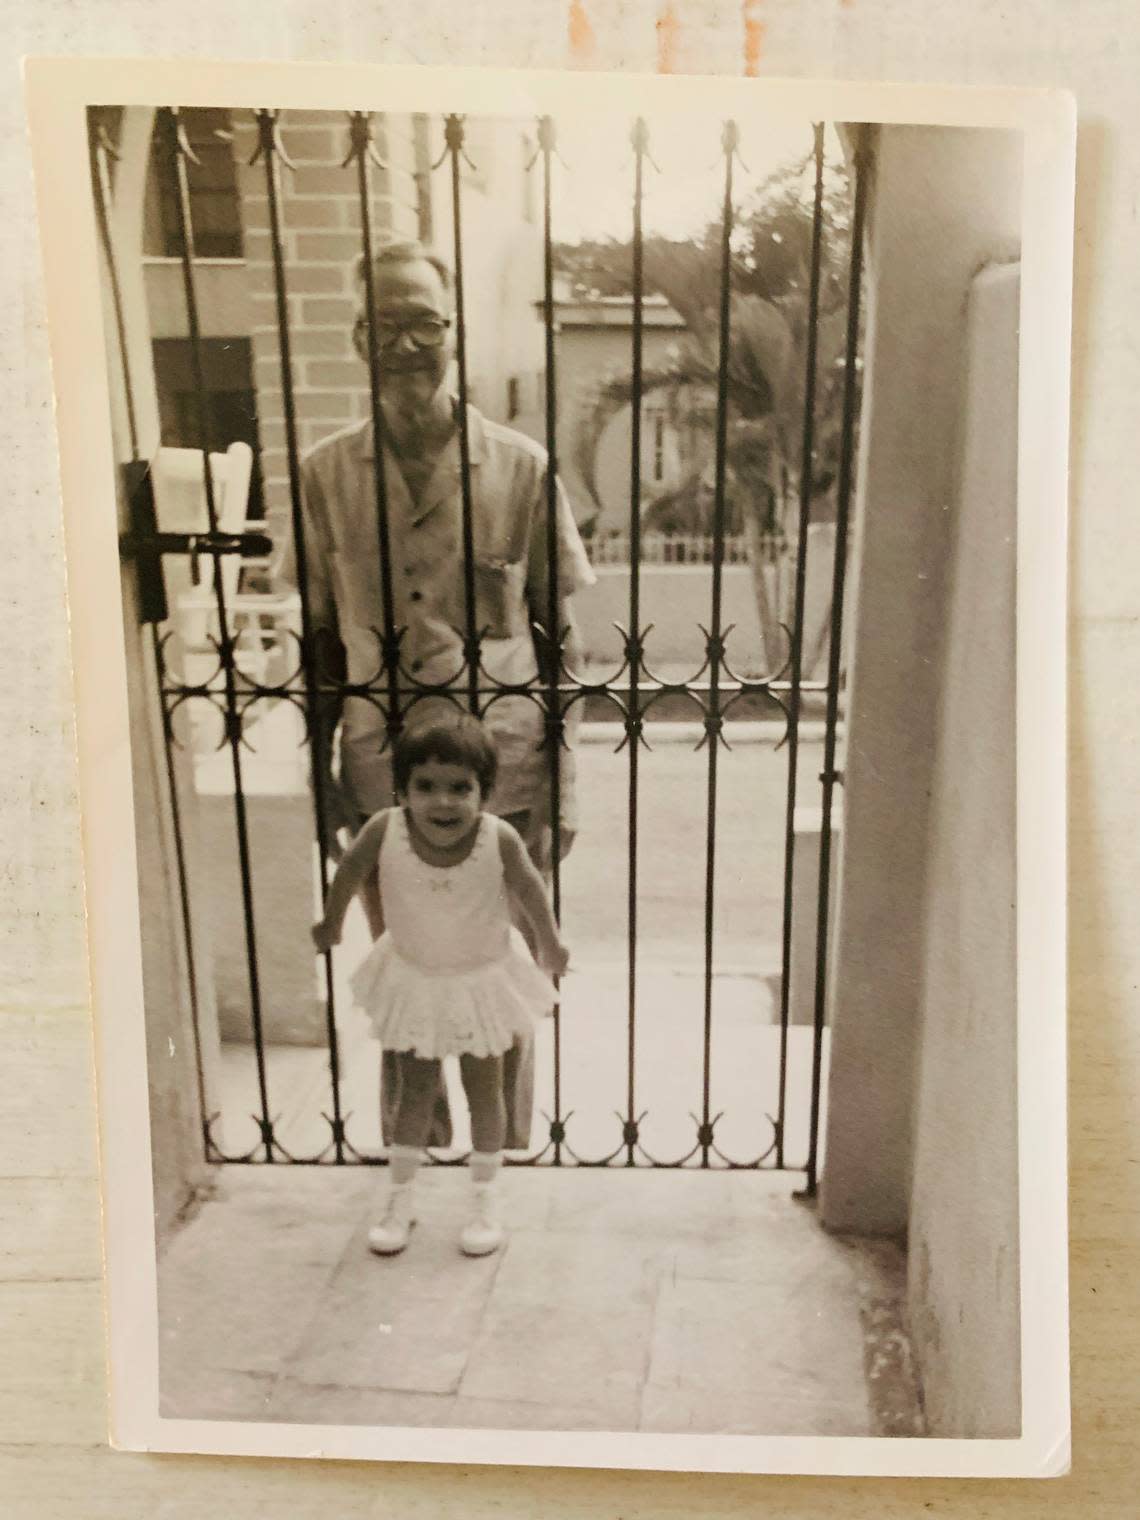 Janet in Cuba, with her grandfather Manolo, who before the arrival of Castroism was the owner of several bodegas and candy stores on the island, including La Favorita, in Artemisa, where he sold fine liquors. Manolo’s story also inspired Díaz Bonilla to create La Marielita rum.